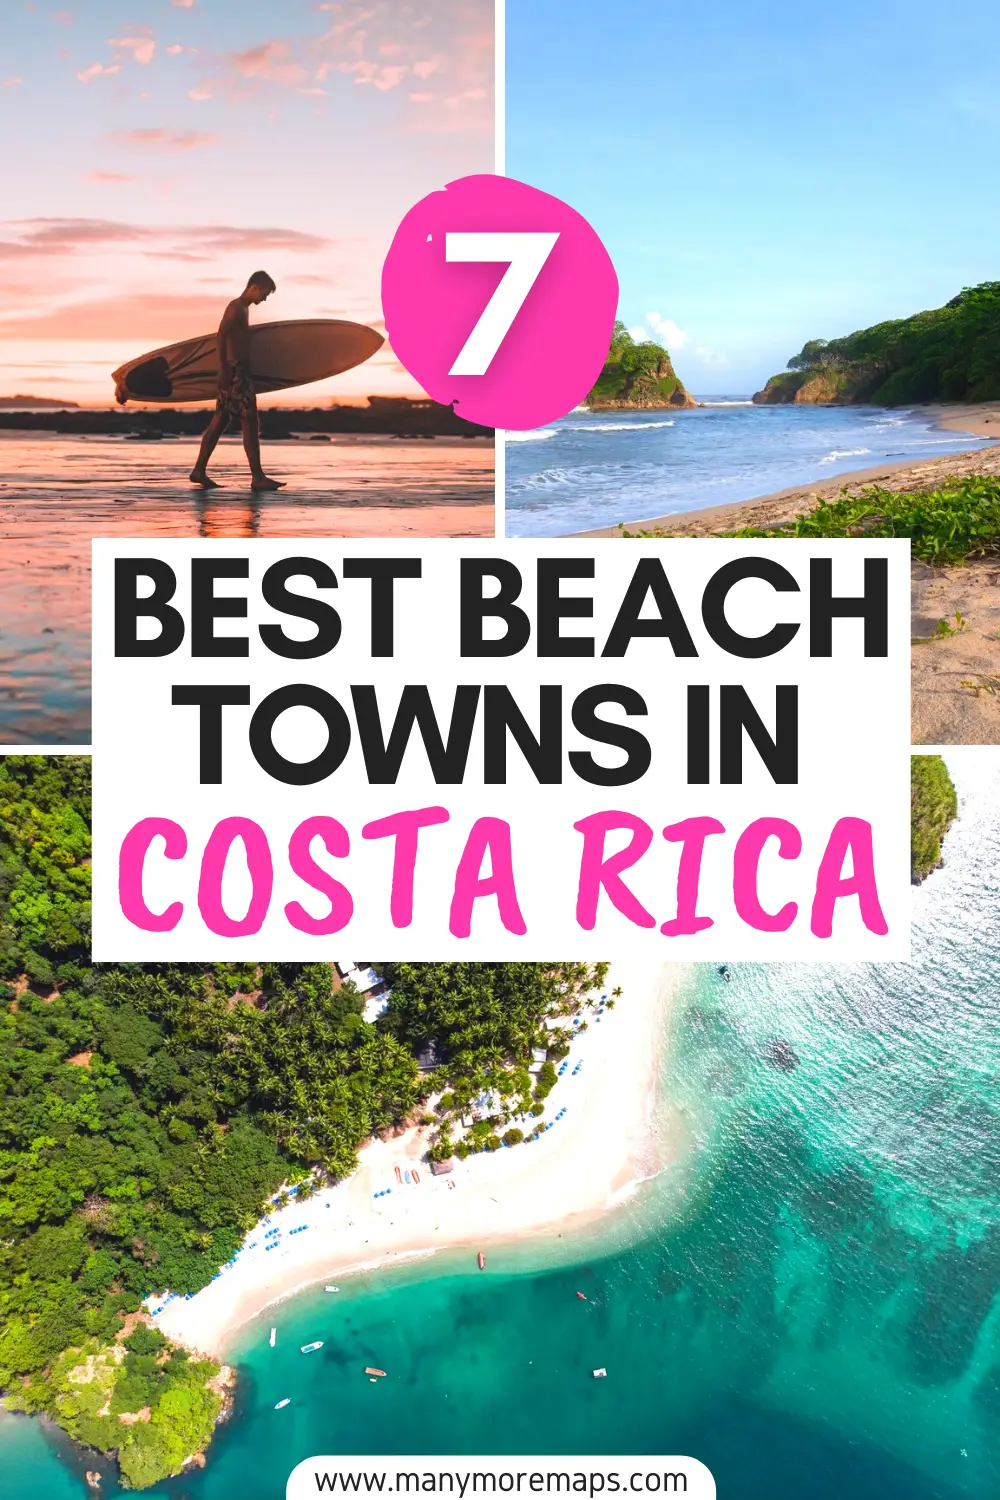 Looking for the best beach towns in Costa Rica? Want to know where the best places to go surfing in Costa Rica are? Then check out this post which includes all the very best beaches that you need to add to your Costa Rica travel itinerary!